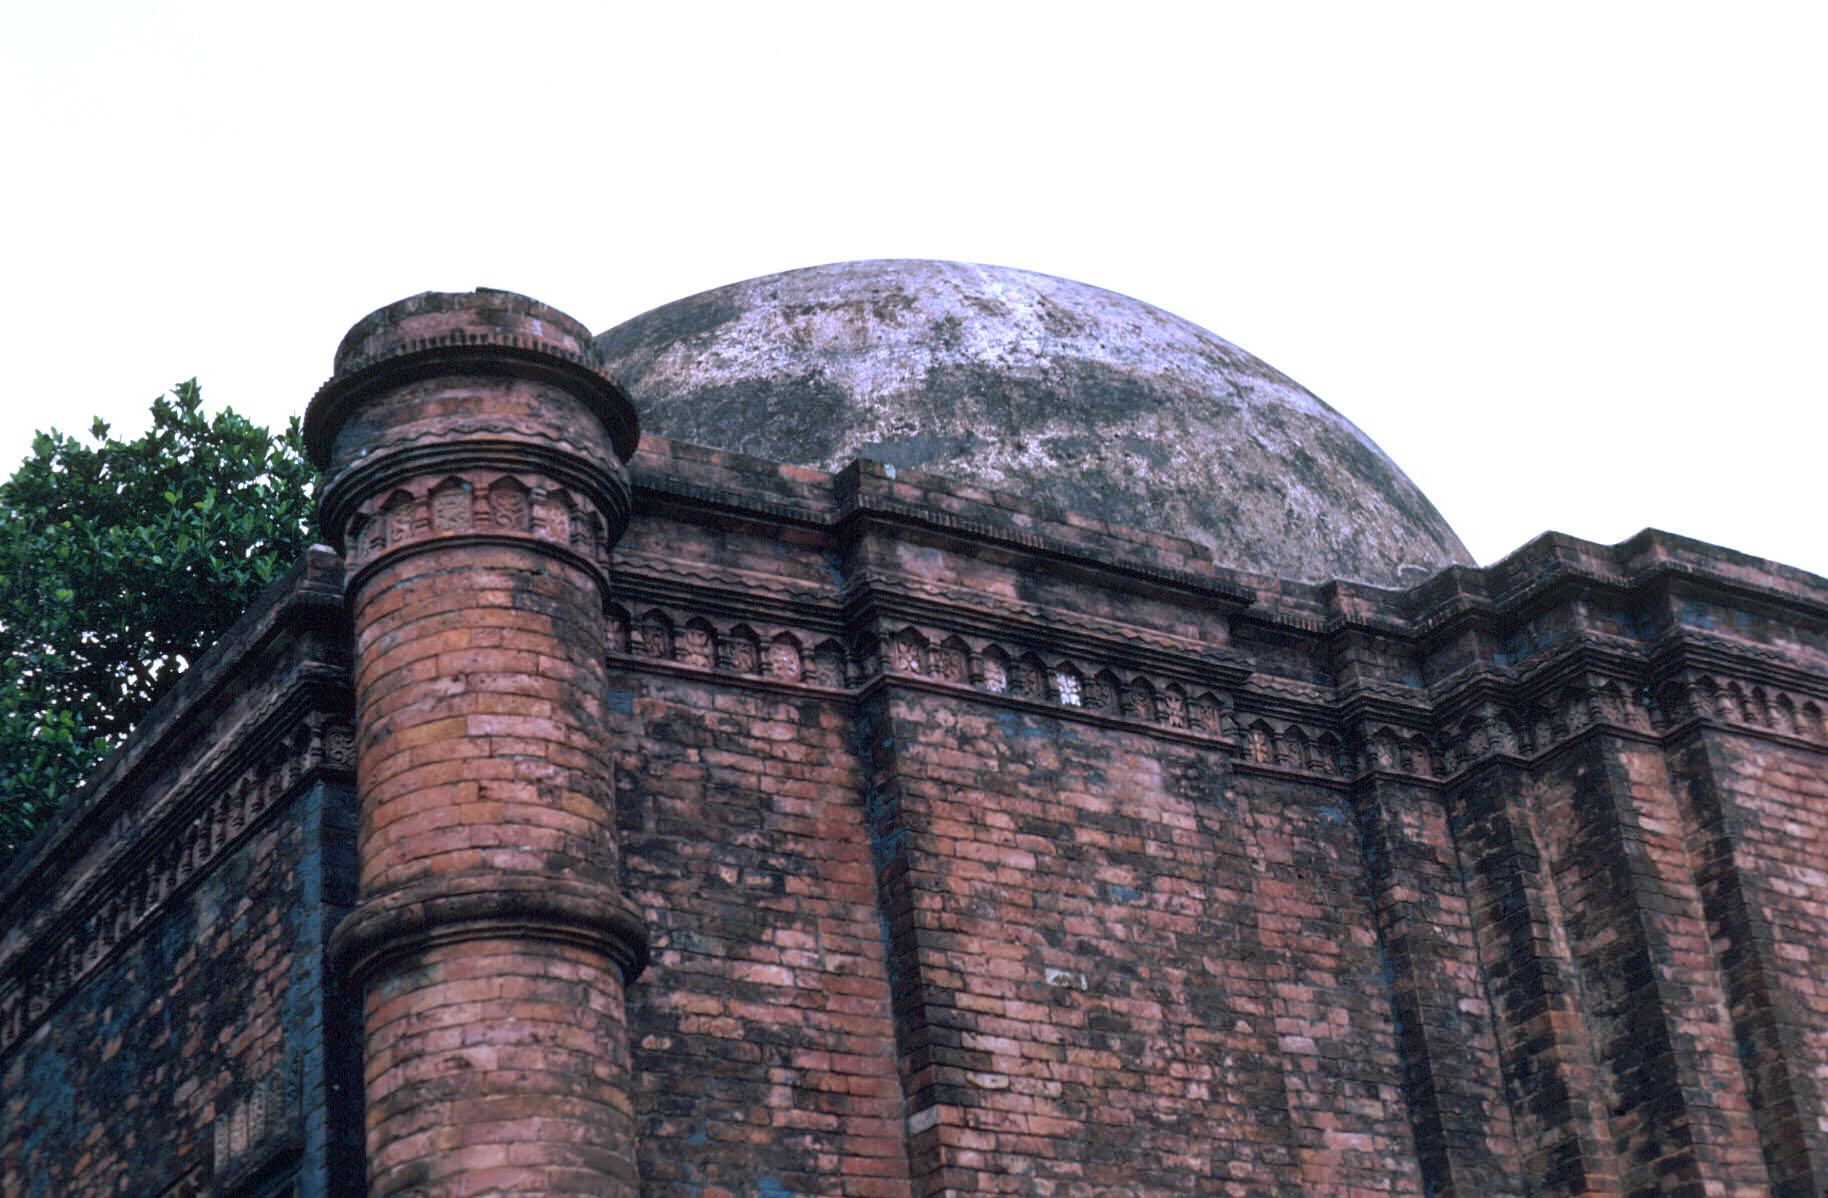 Cornice detail of west elevation (qibla wall)